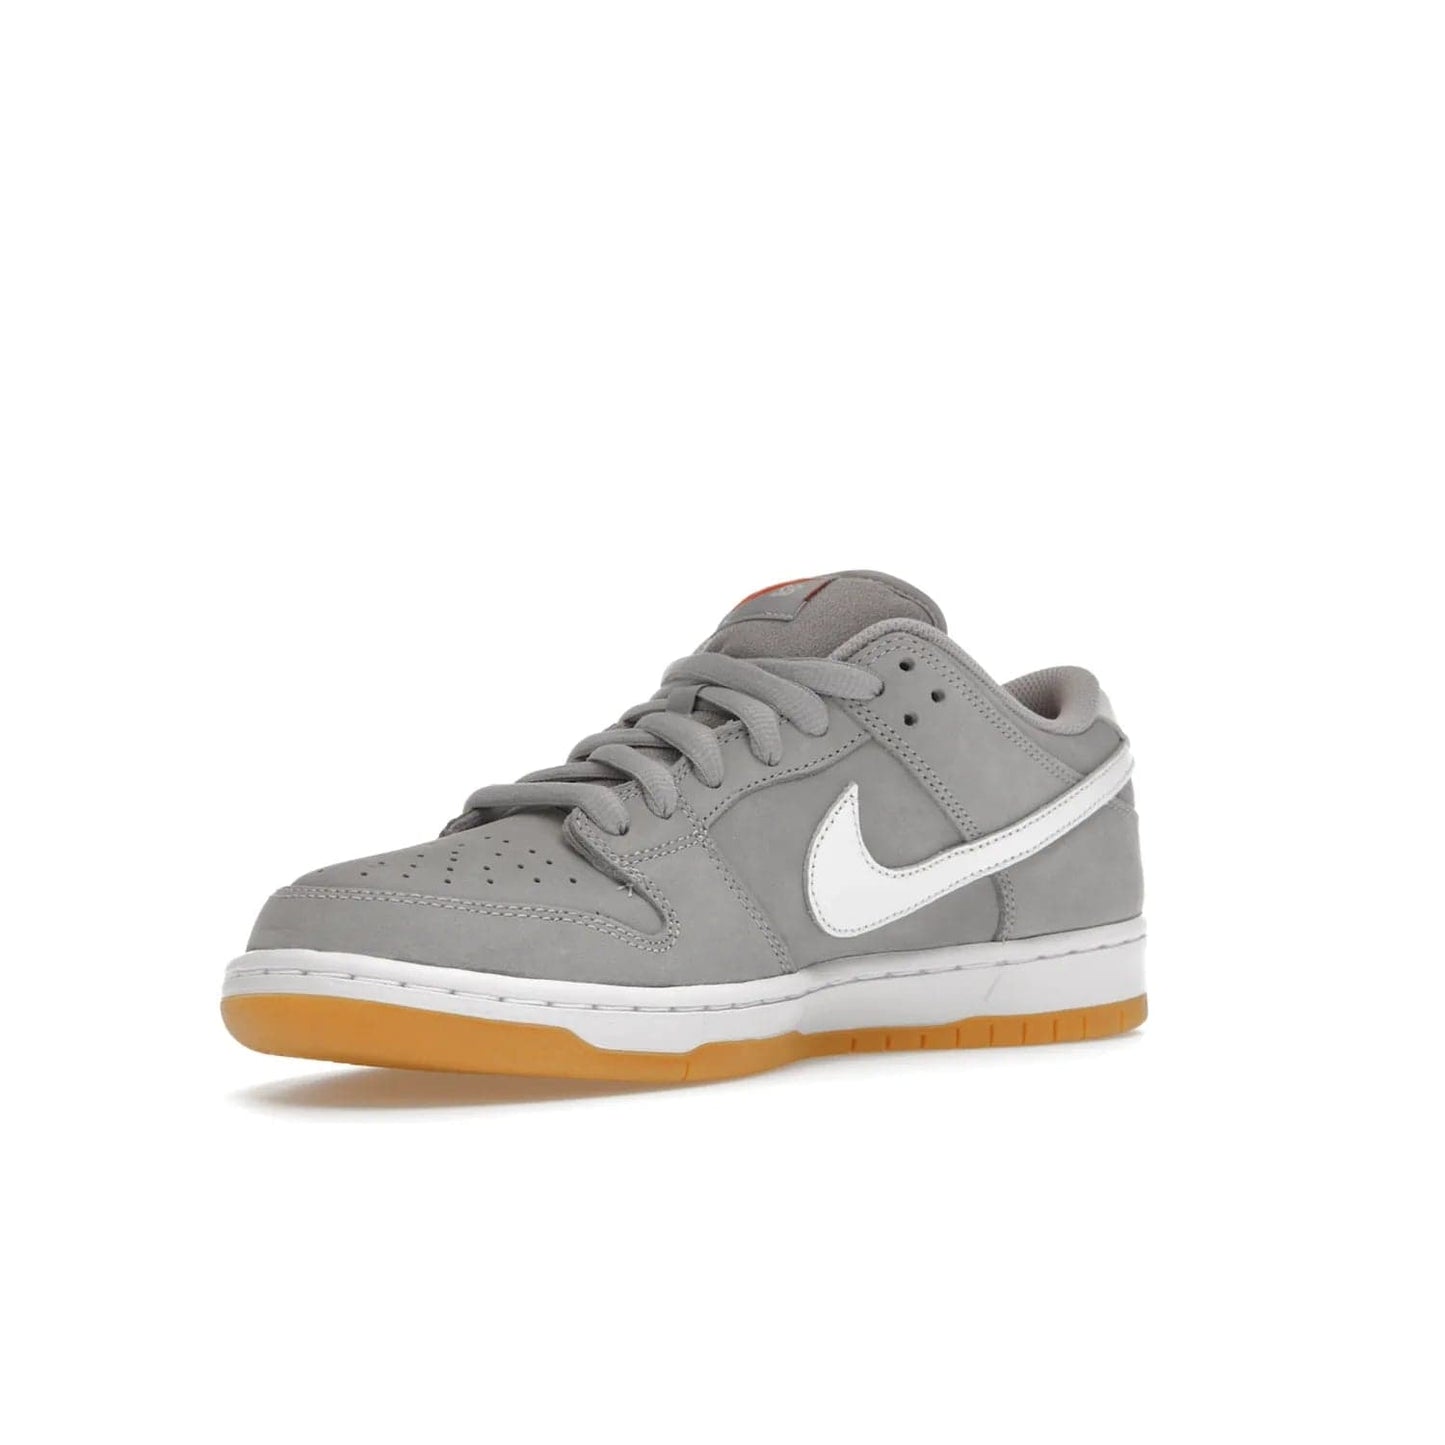 Nike SB Dunk Low Pro ISO Orange Label Wolf Grey Gum - Image 15 - Only at www.BallersClubKickz.com - Introducing Nike's SB Dunk Low Pro ISO Orange Label Wolf Grey Gum - a stylish shoe with a premium Wolf Grey upper, white leather Nike Swoosh, and an eye-catching gum outsole. With special Nike branding and packaging, this shoe adds a unique fashion statement. Out Feb. 24, 2023.